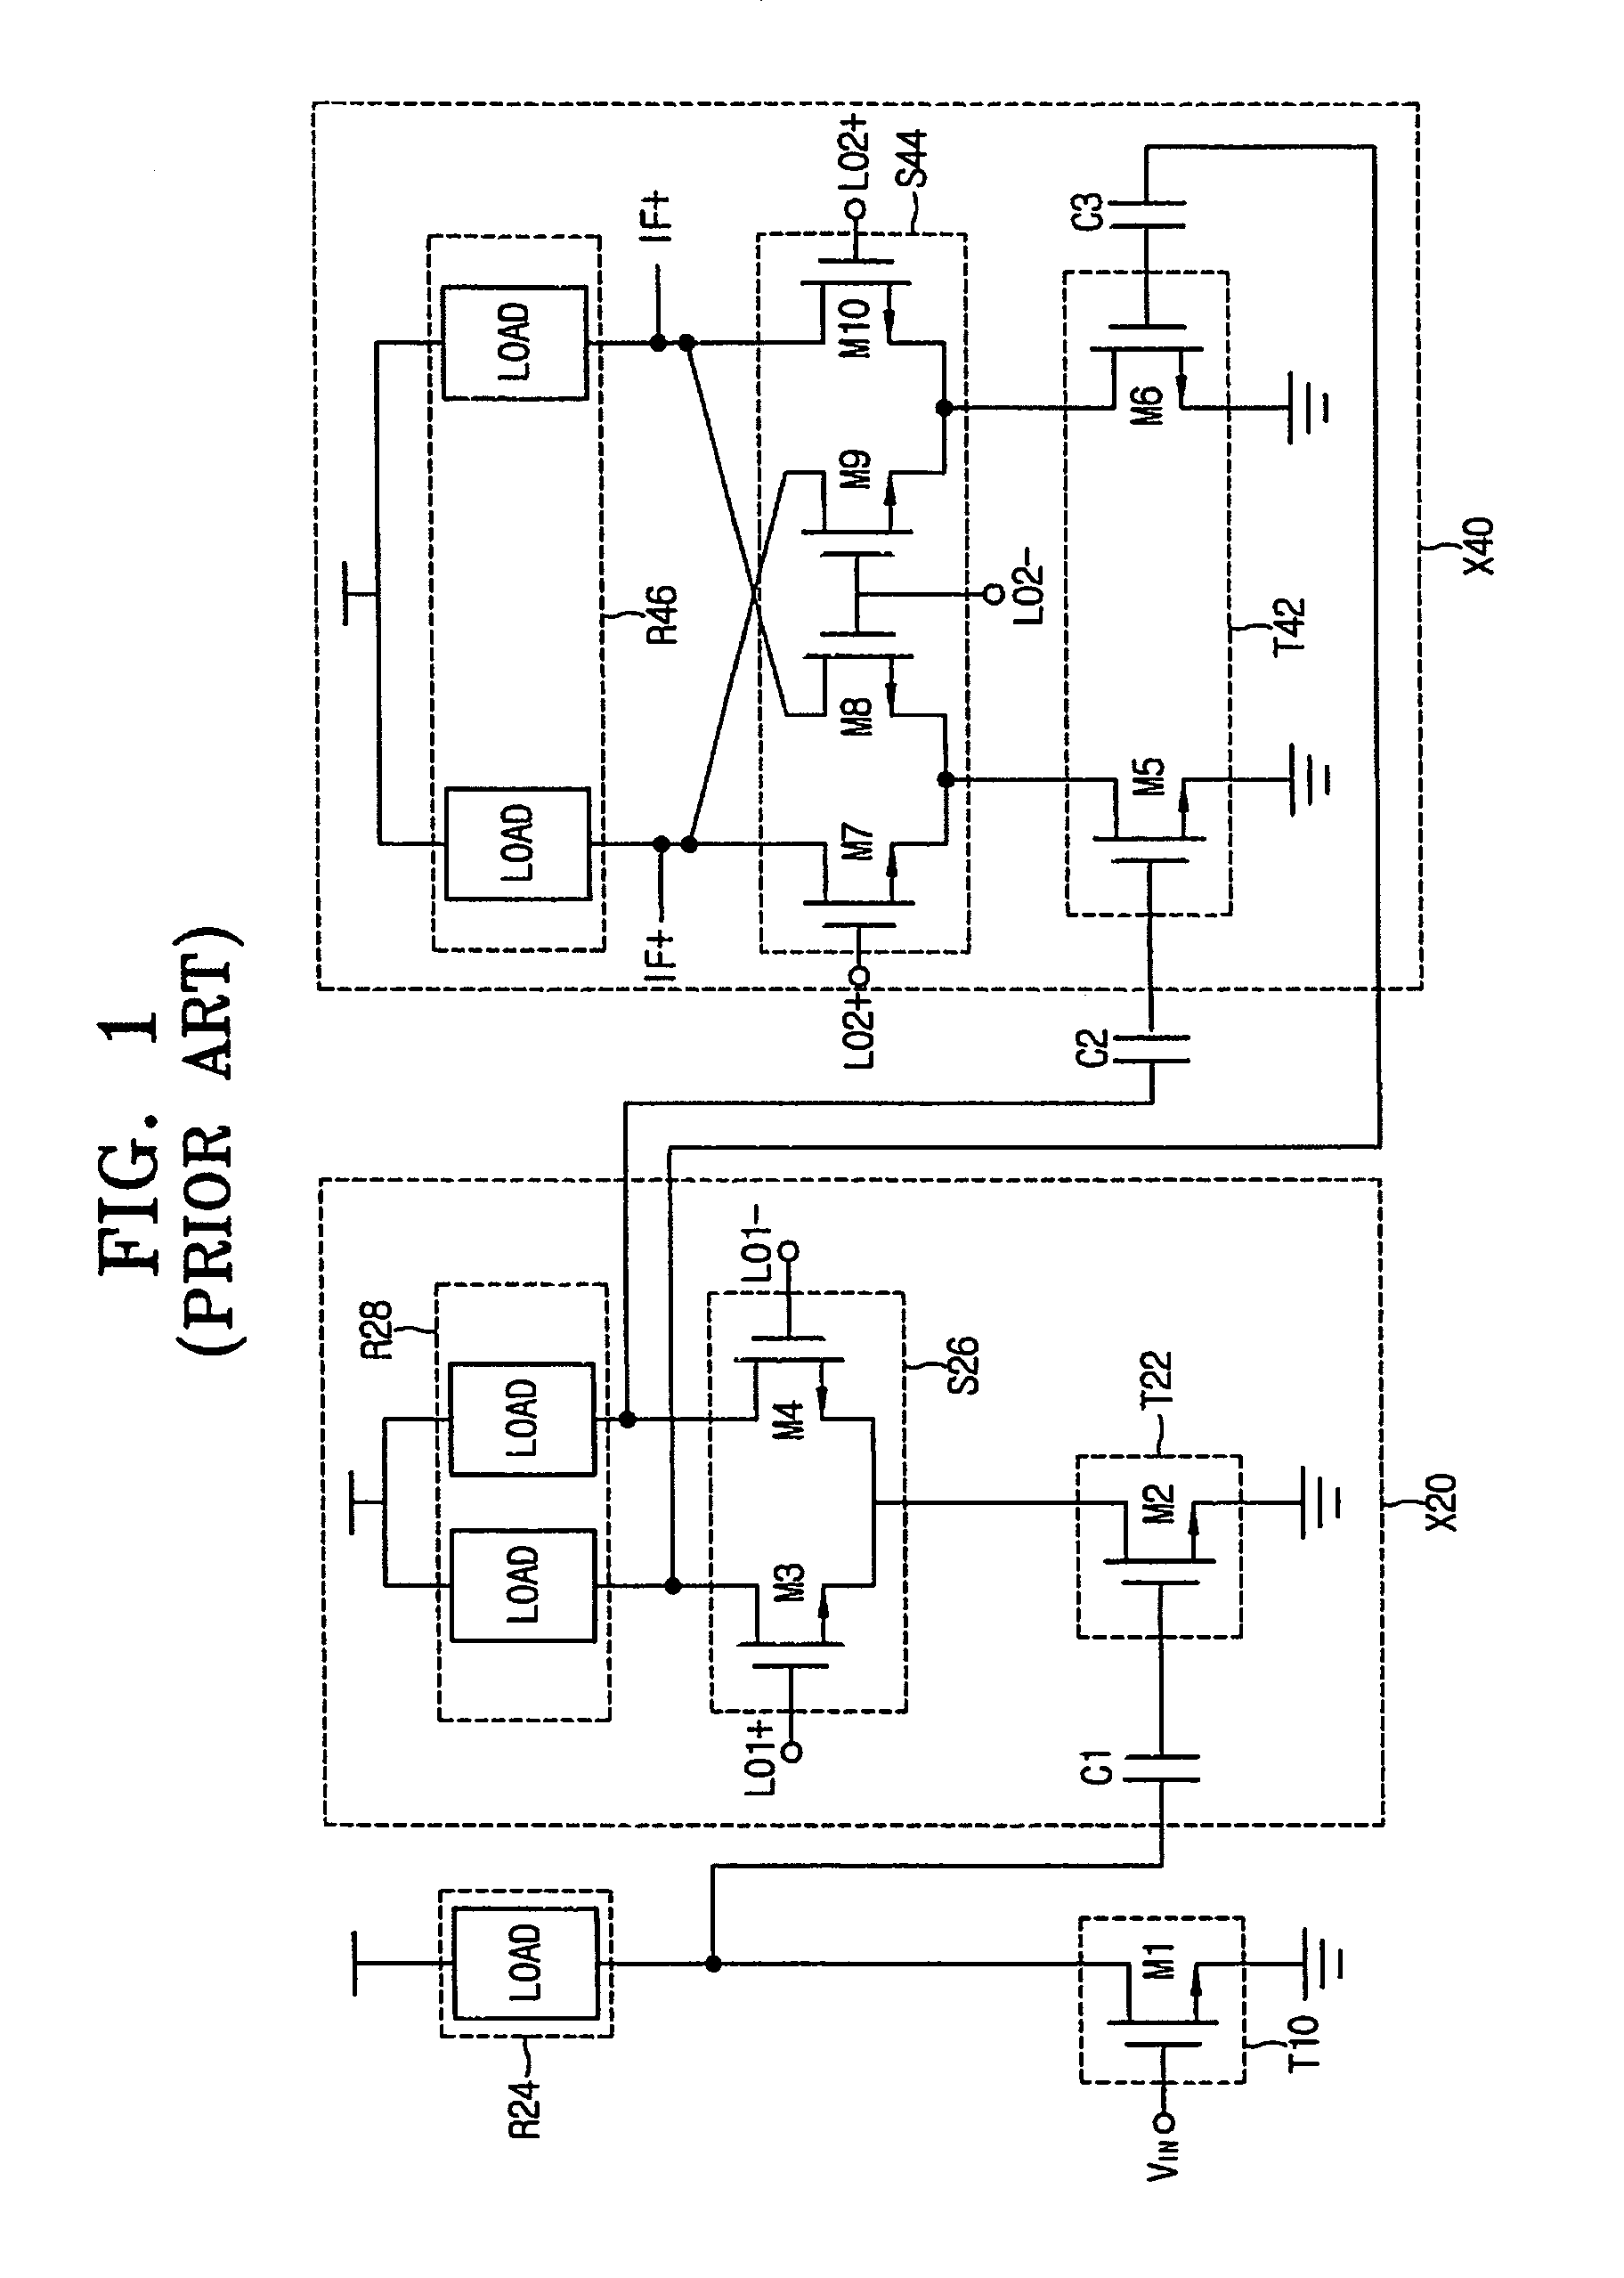 Linear mixer with current amplifier